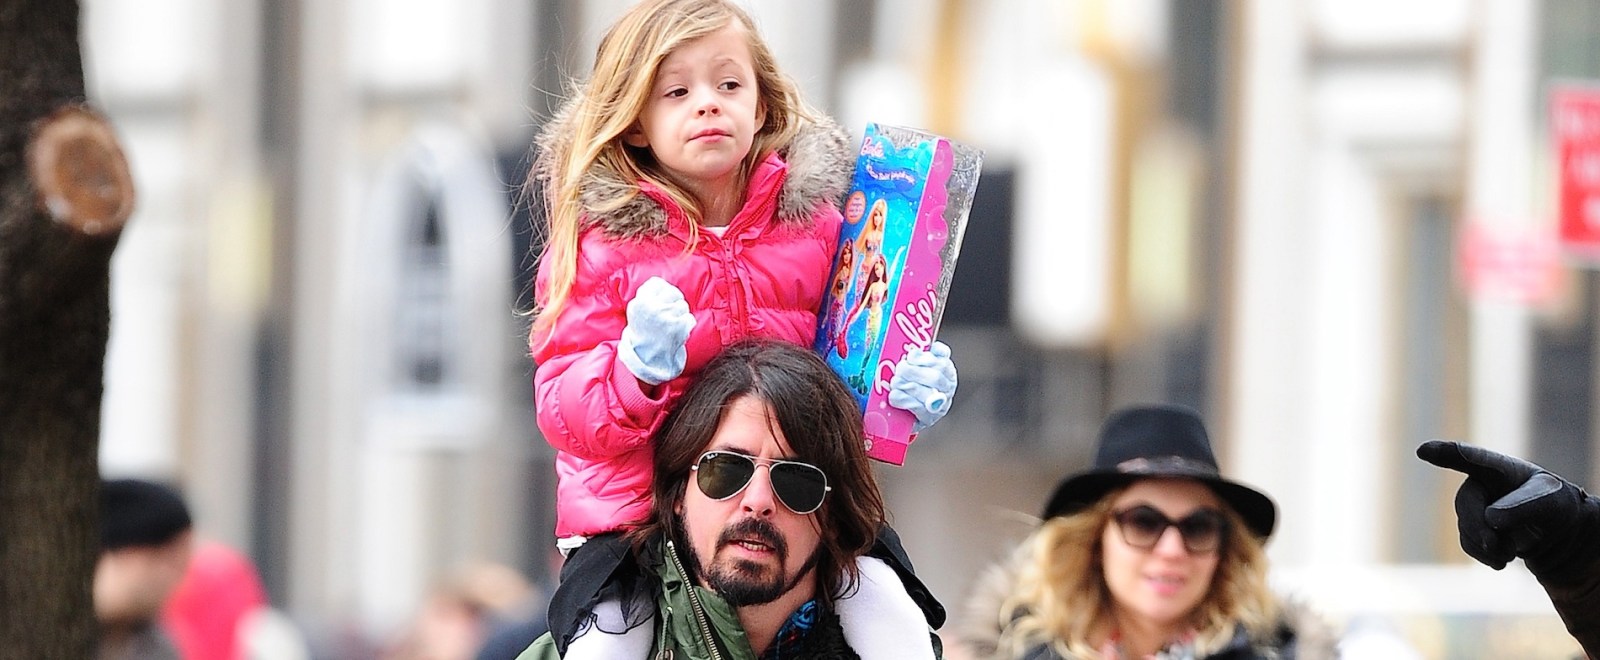 dave-grohl-violet-daughter-getty-full.jpg